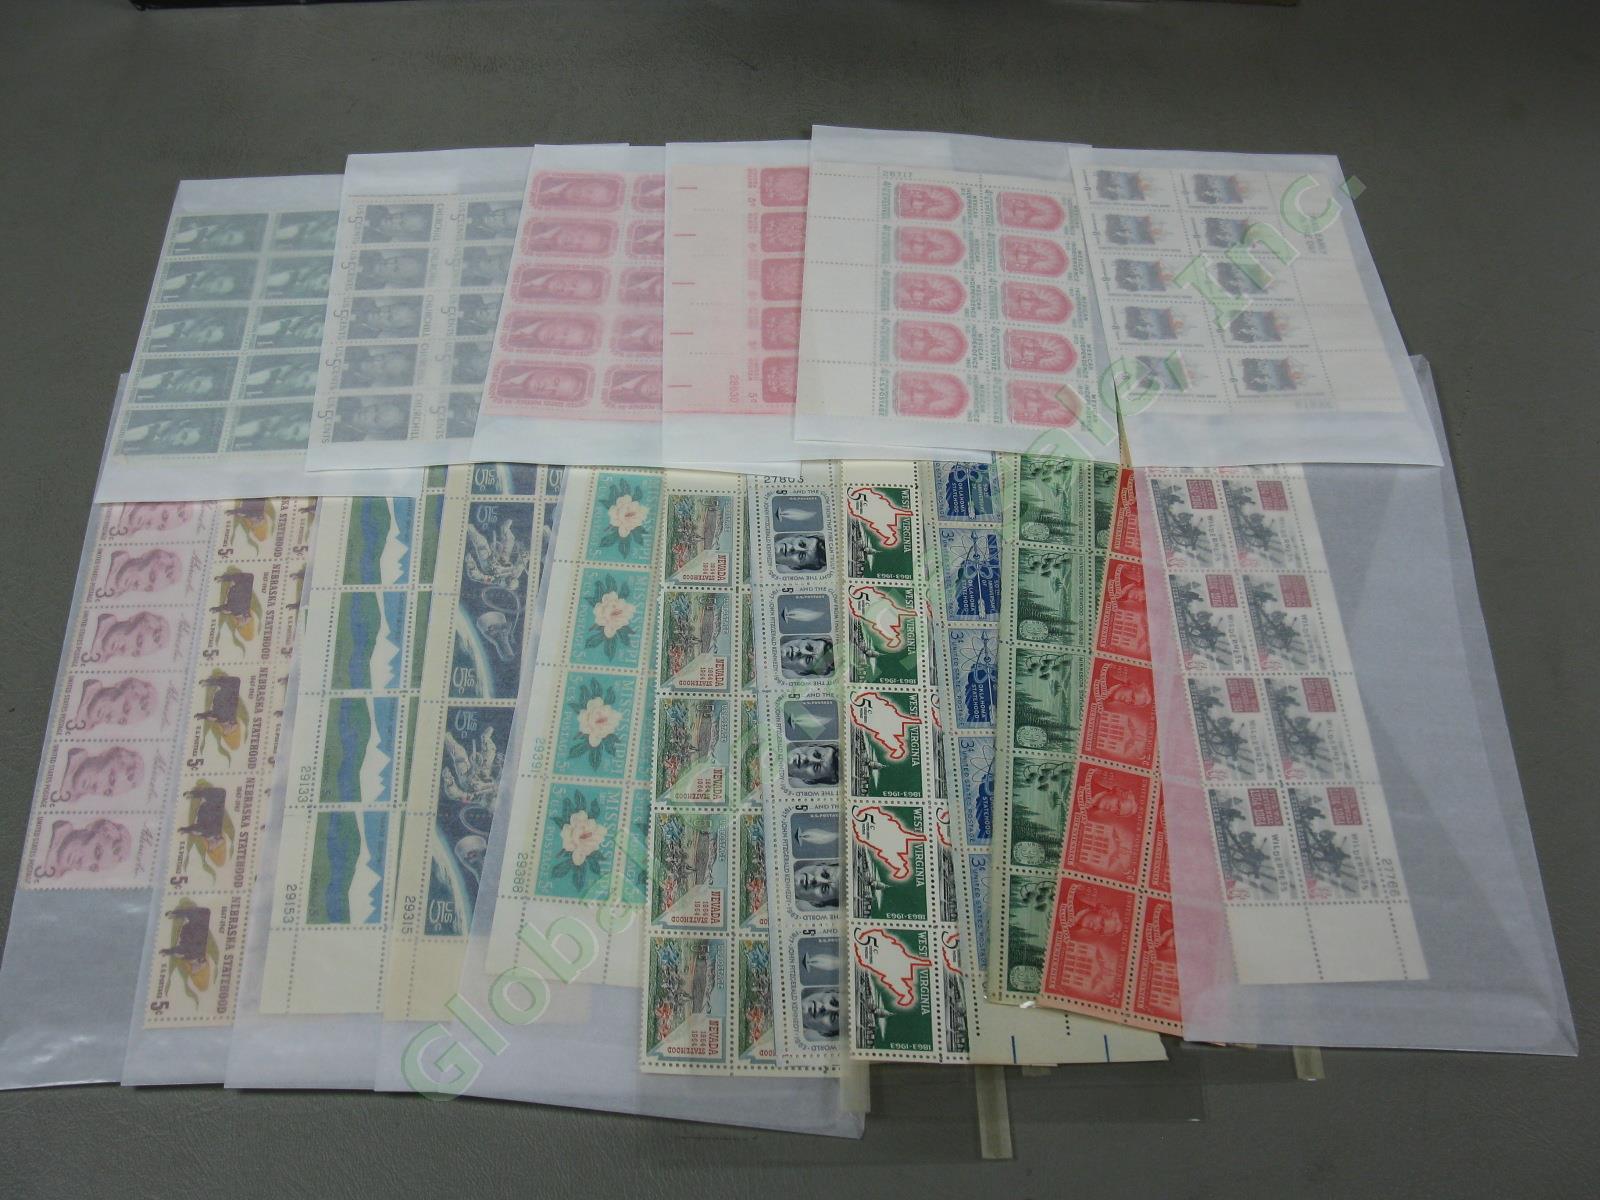 HUGE LOT ~800 Mixed Vtg FDC + US Stamp Plate Block Sheet Collection 1953-1975 NR 3